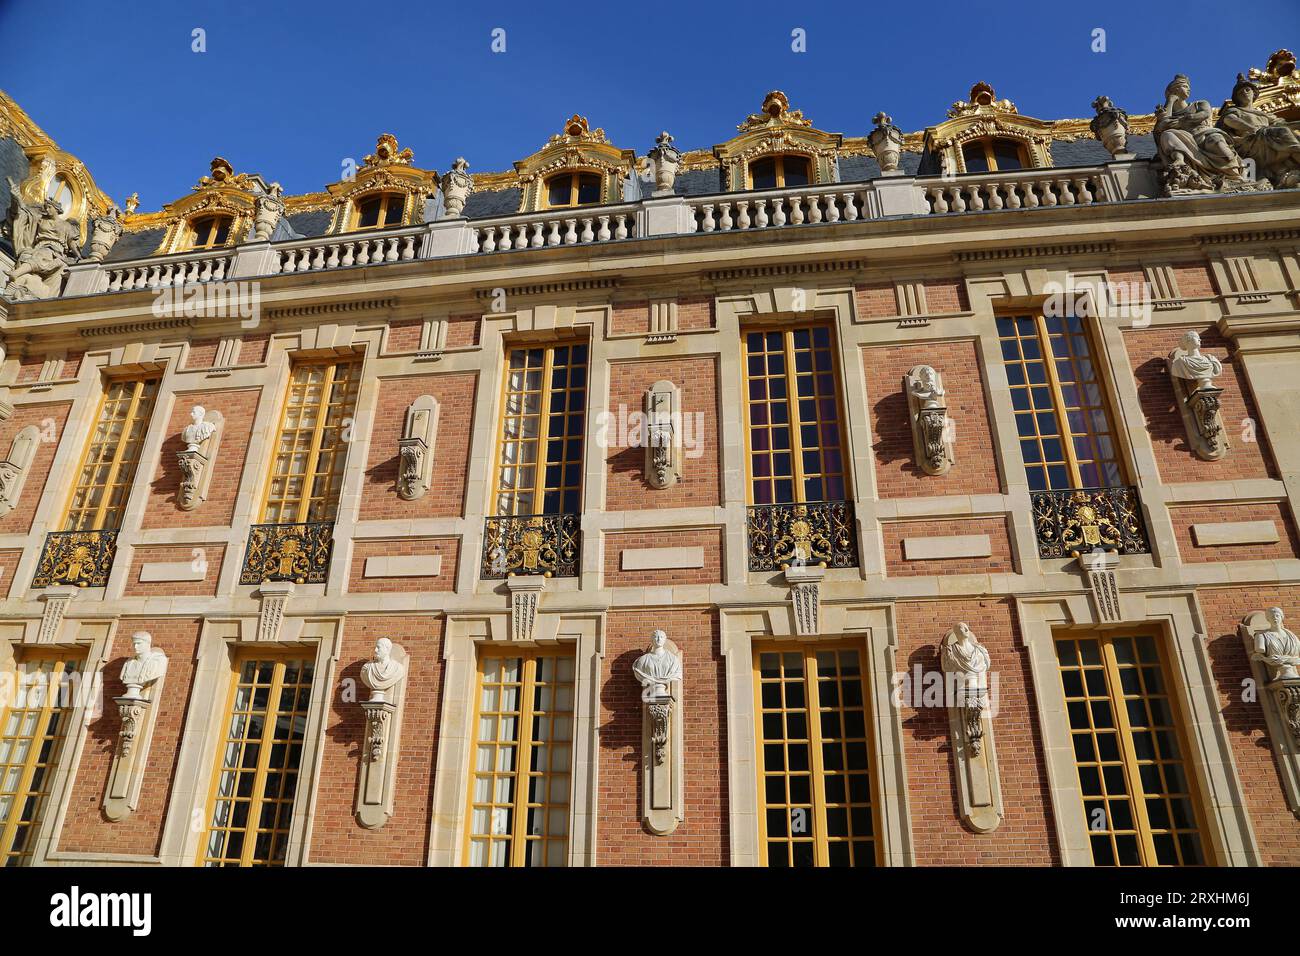 The facade of Versailles Palace, France Stock Photo